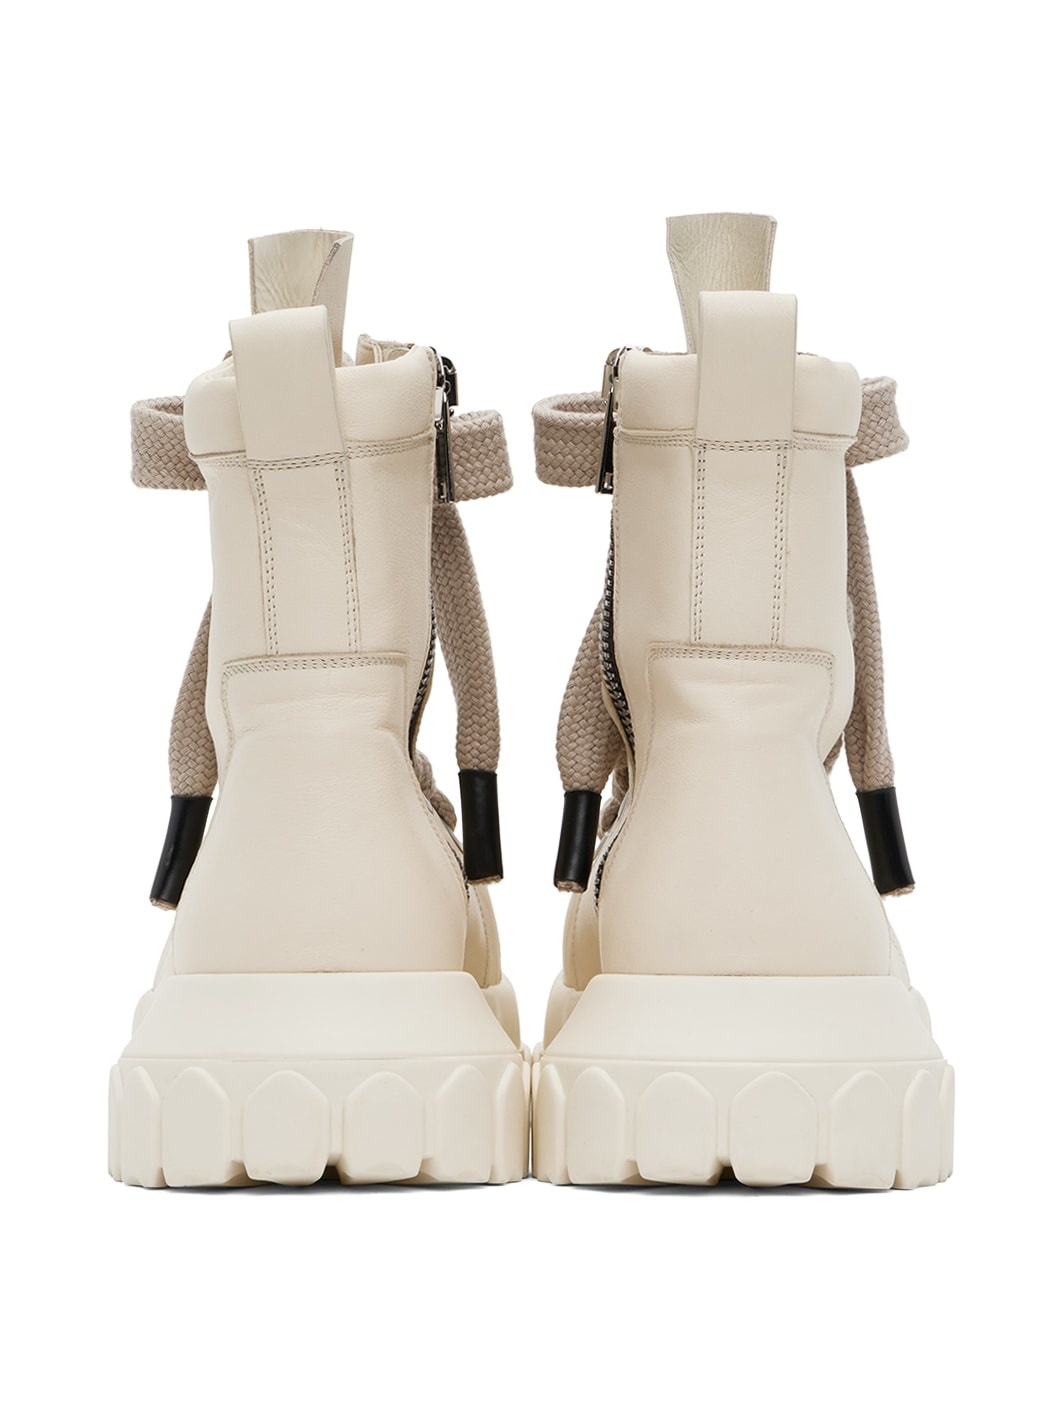 Off-White Jumbo Laced Bozo Tractor Boots - 2